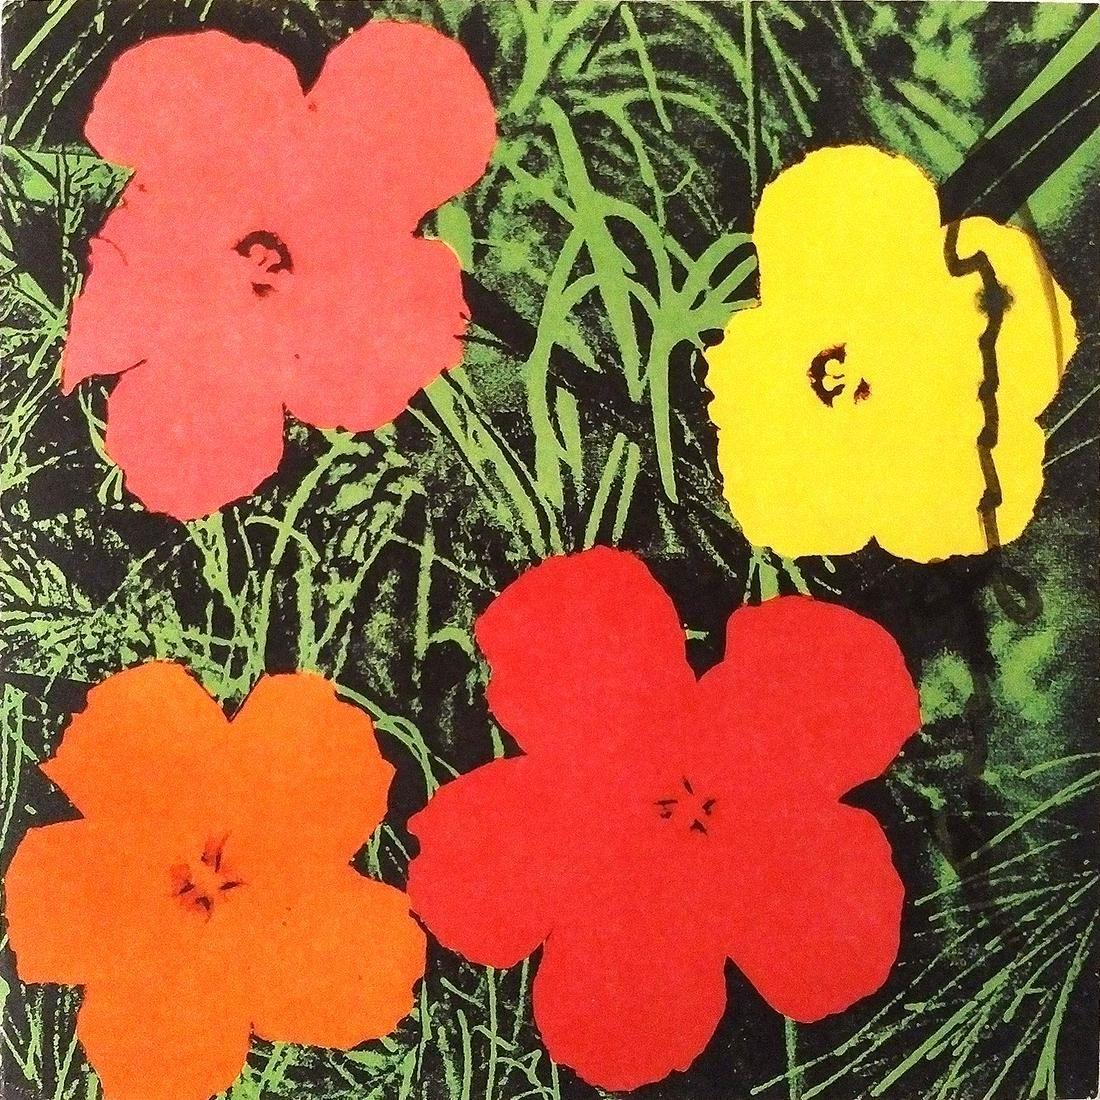 Andy Warhol Abstract Print - Flowers (Invitation)